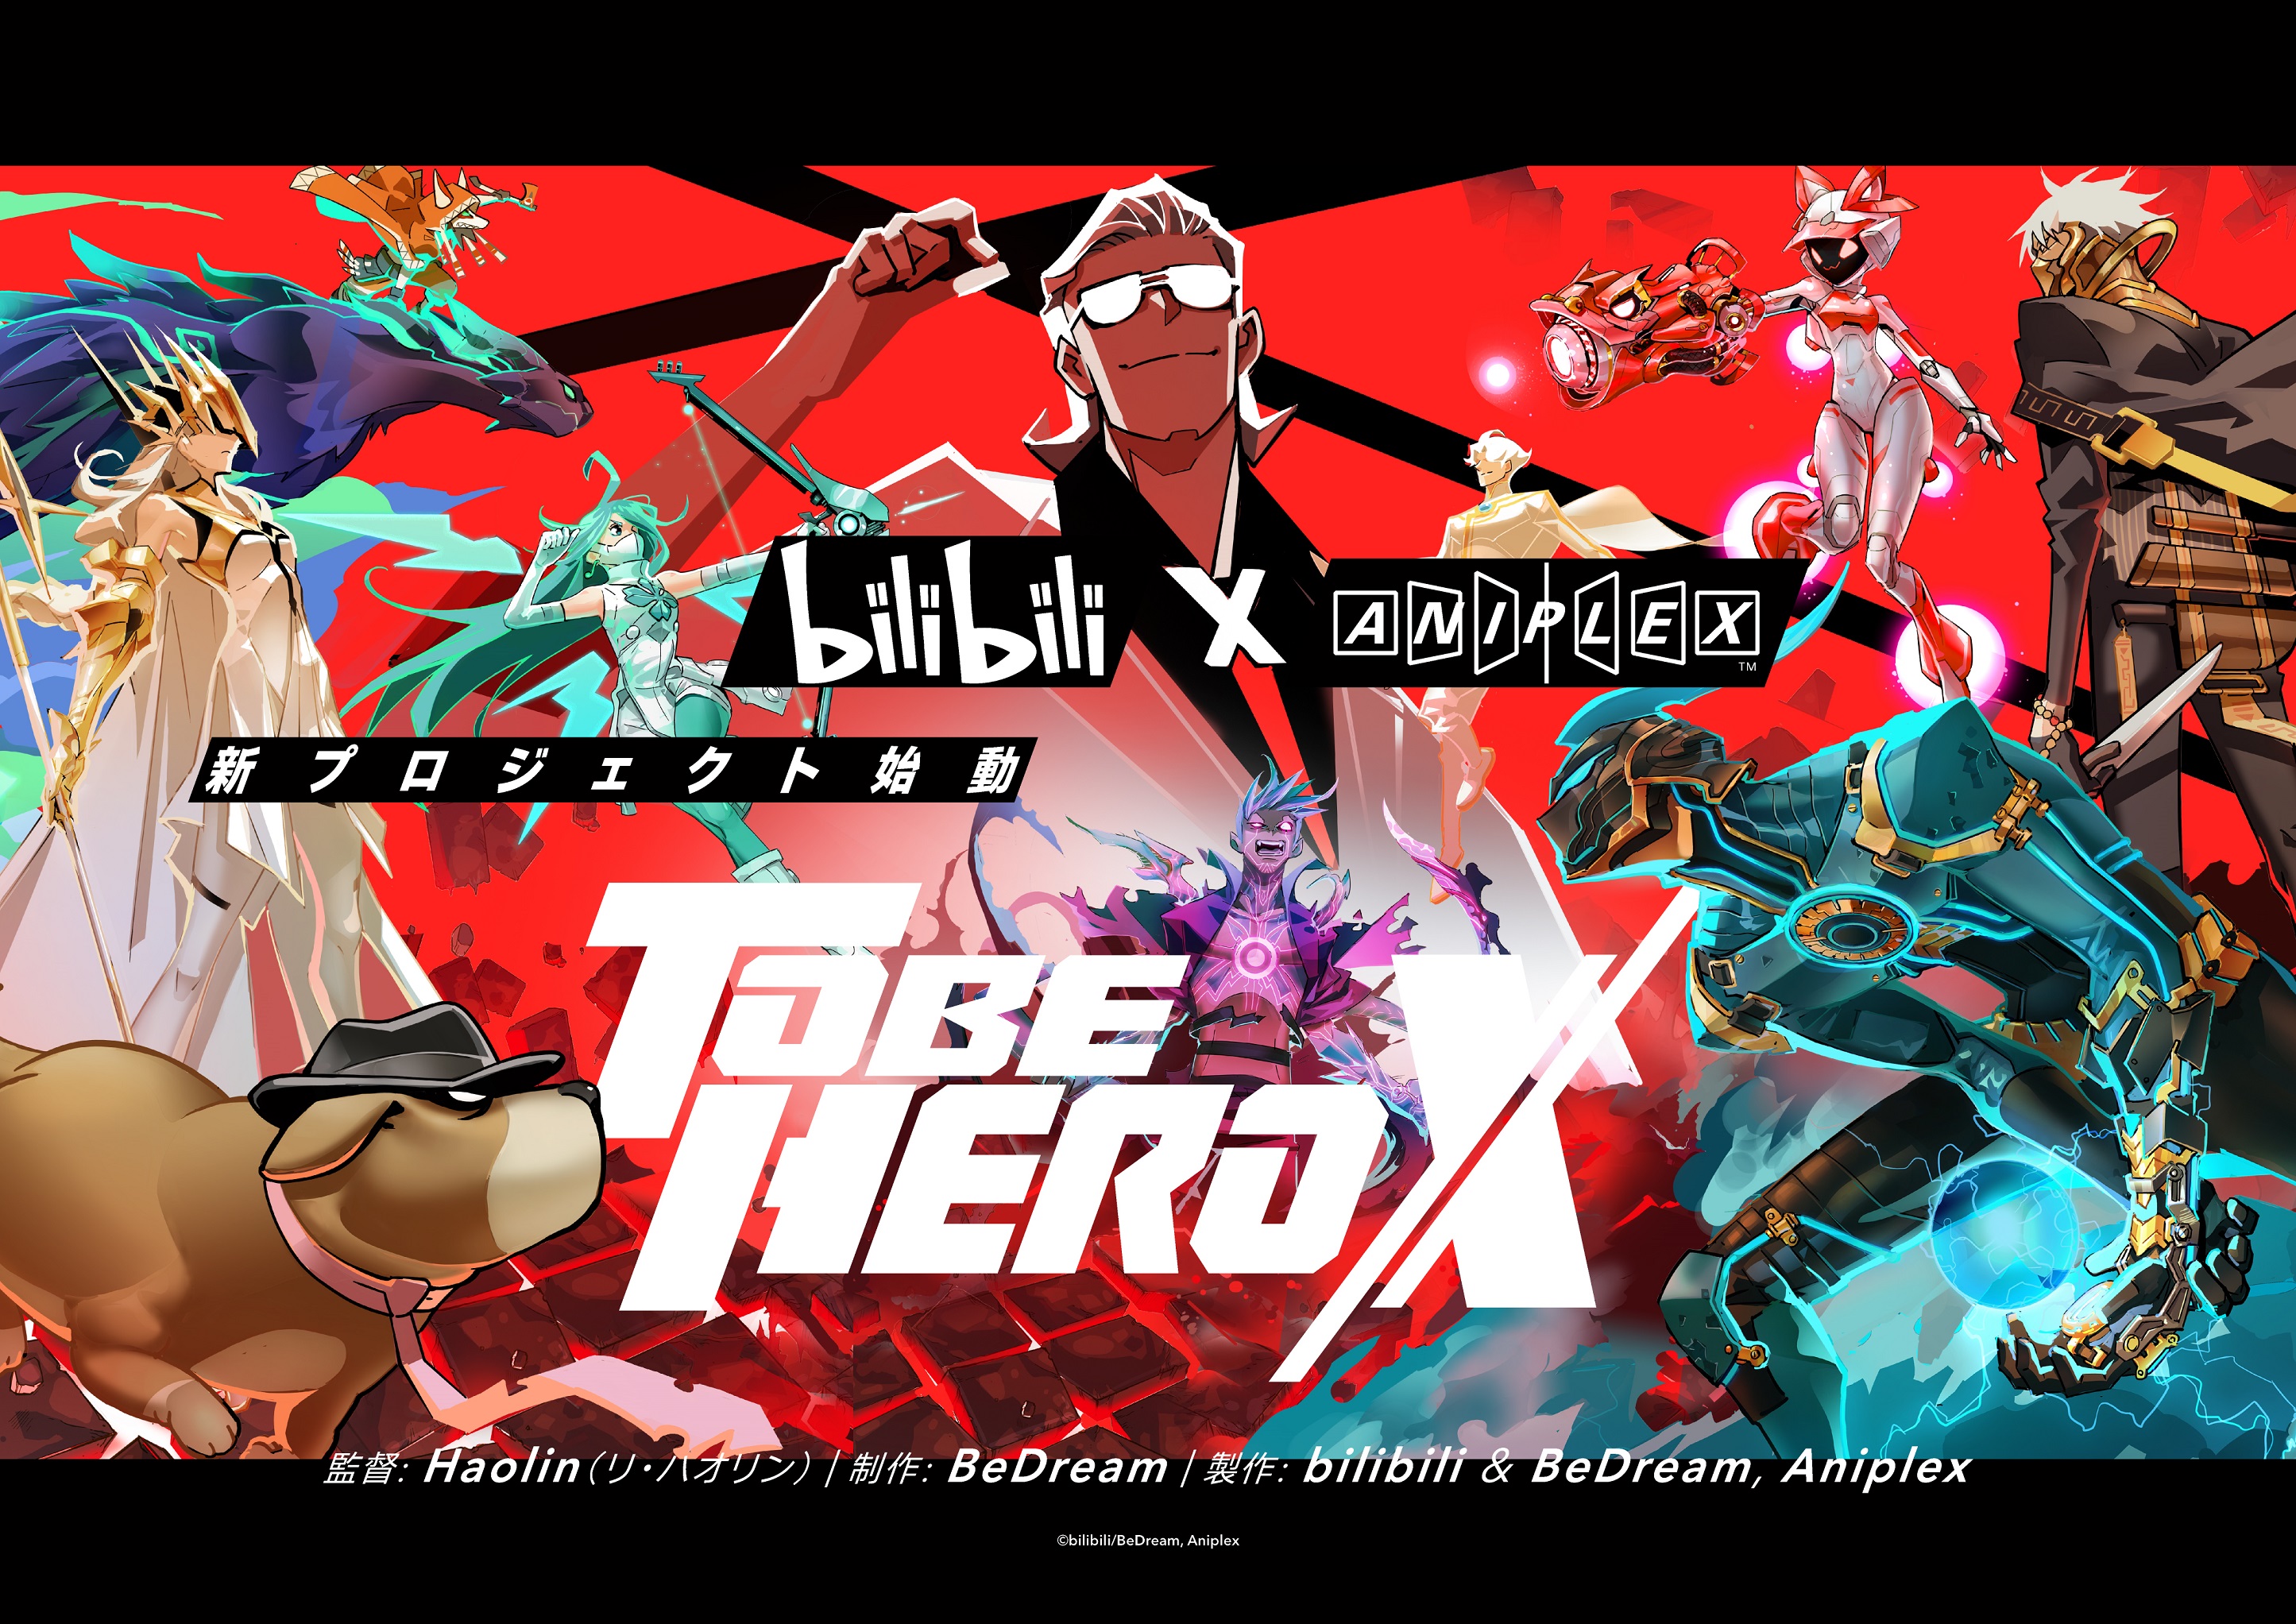 To Be Hero X Revealed as Aniplex, bilibili Collab with Concept Trailer